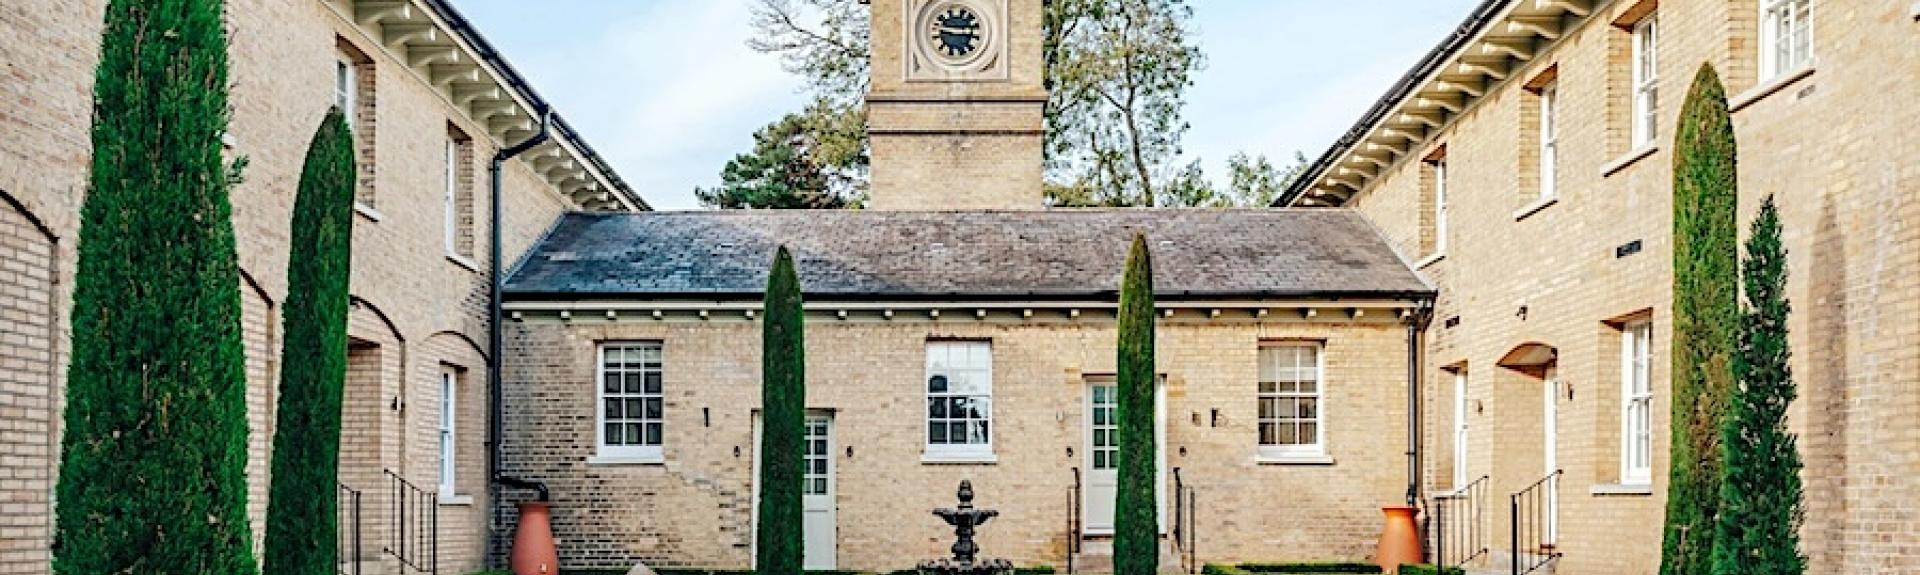 Buckinghamshire holiday cottages in a converted stable  block with a large clock tower